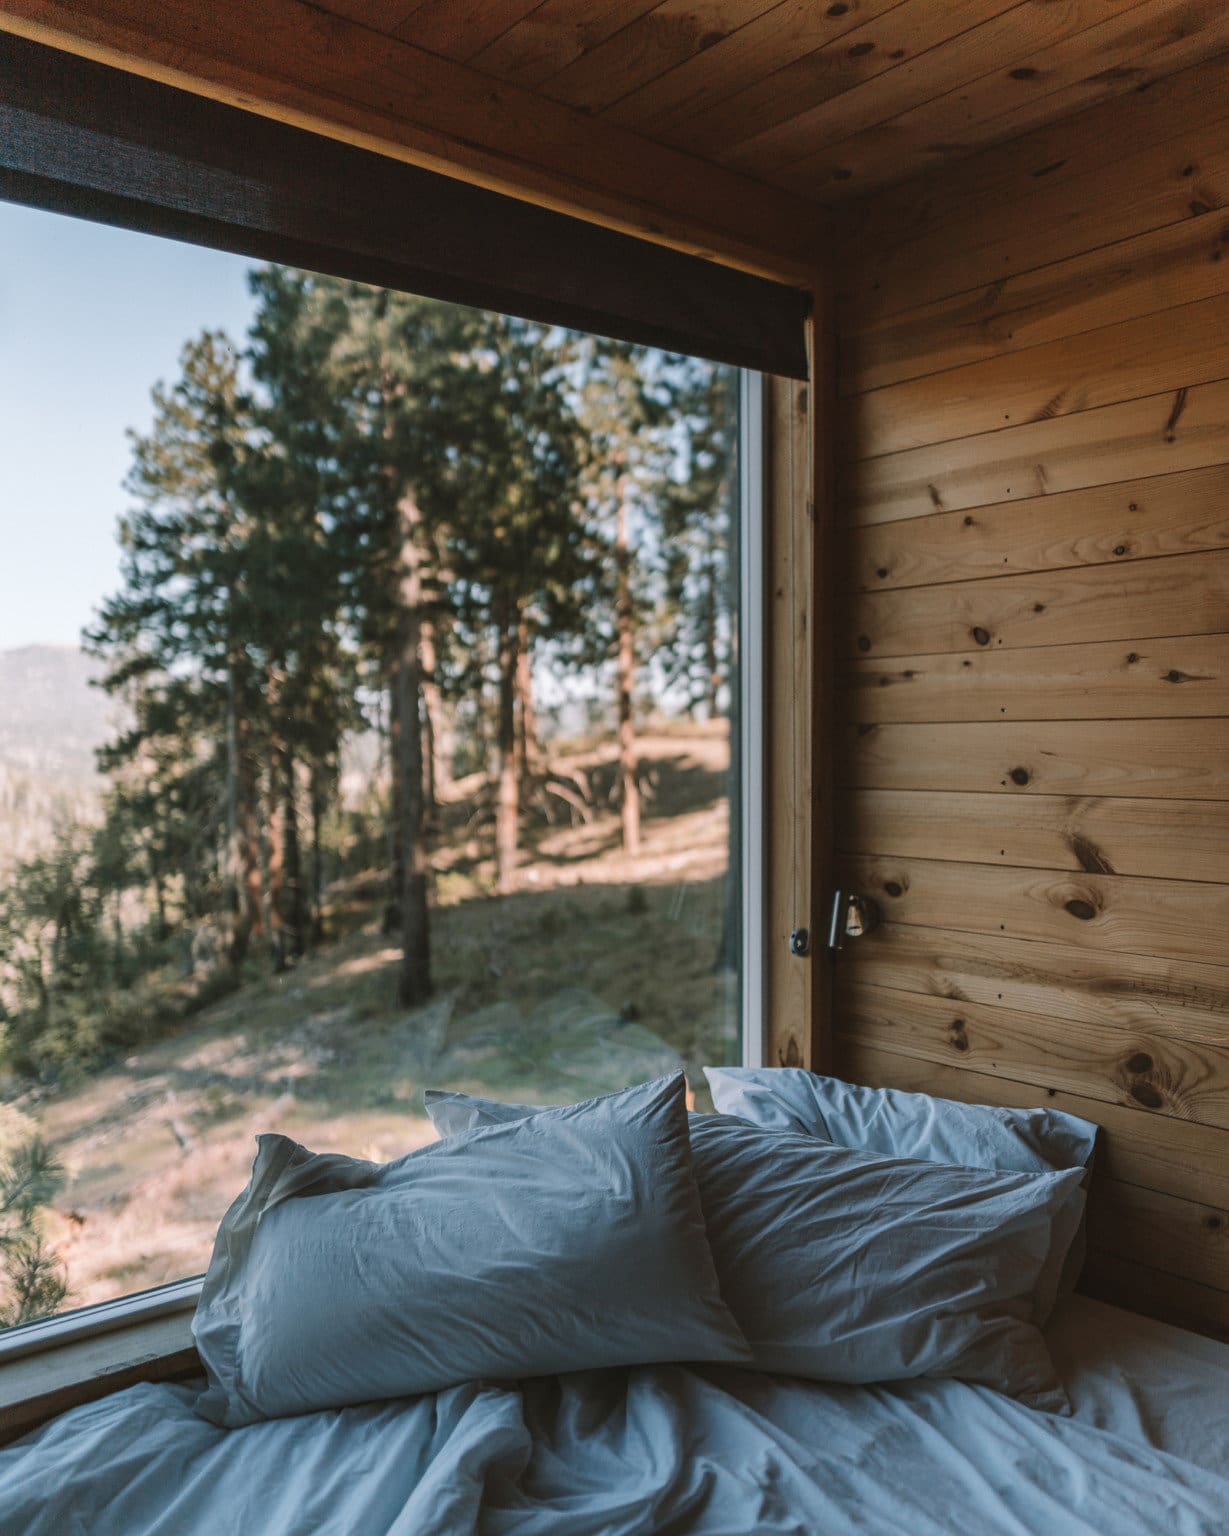 Book this Tiny Cabin for a Romantic Getaway from Los Angeles